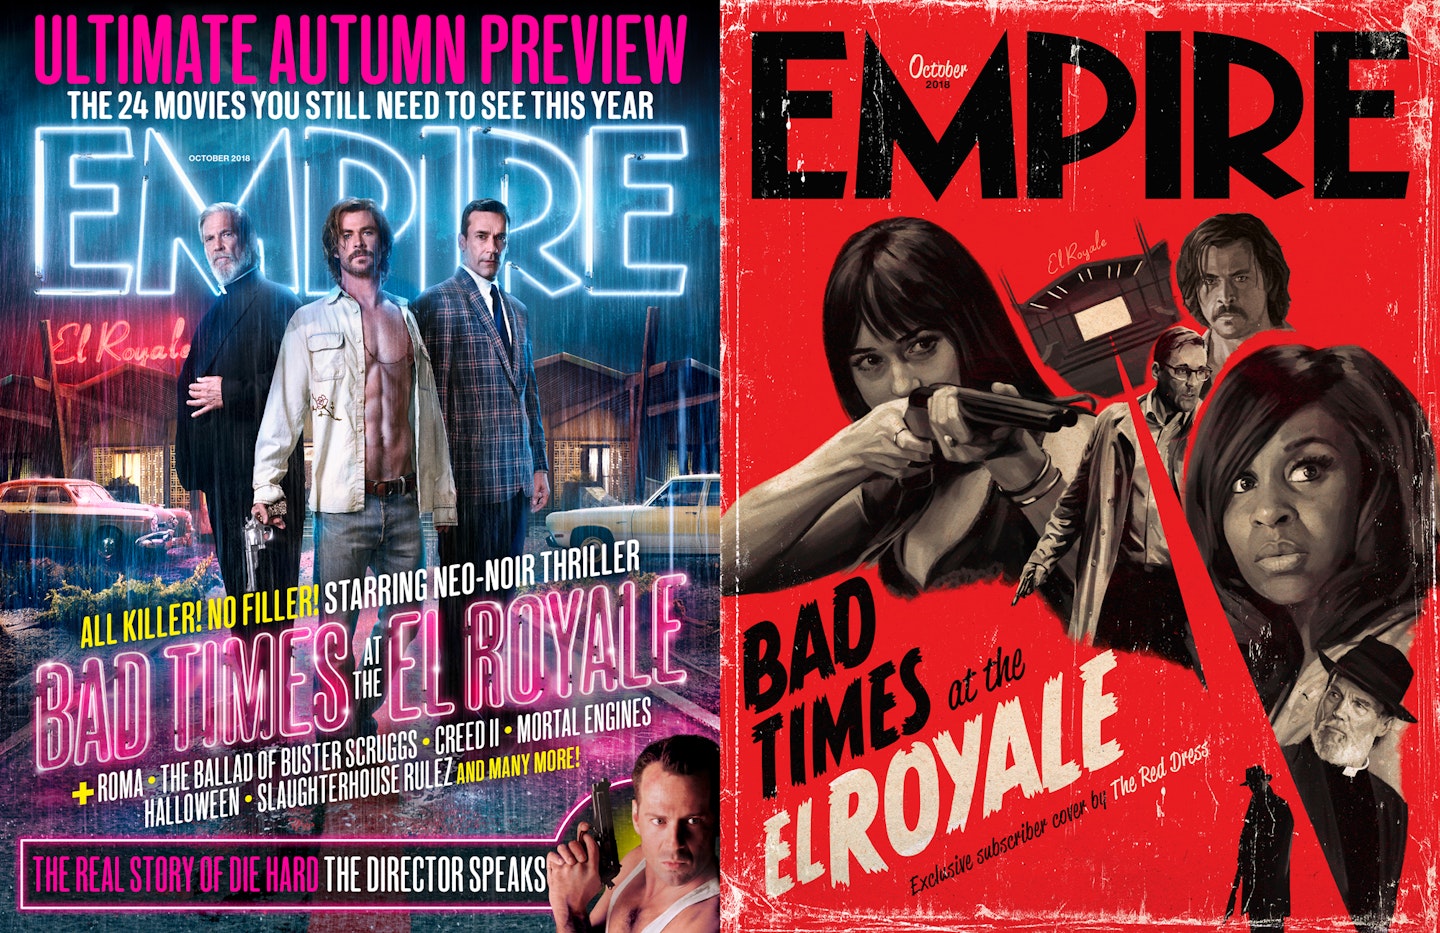 Empire September 2018 - Autumn Preview – Bad Times at the El Royale